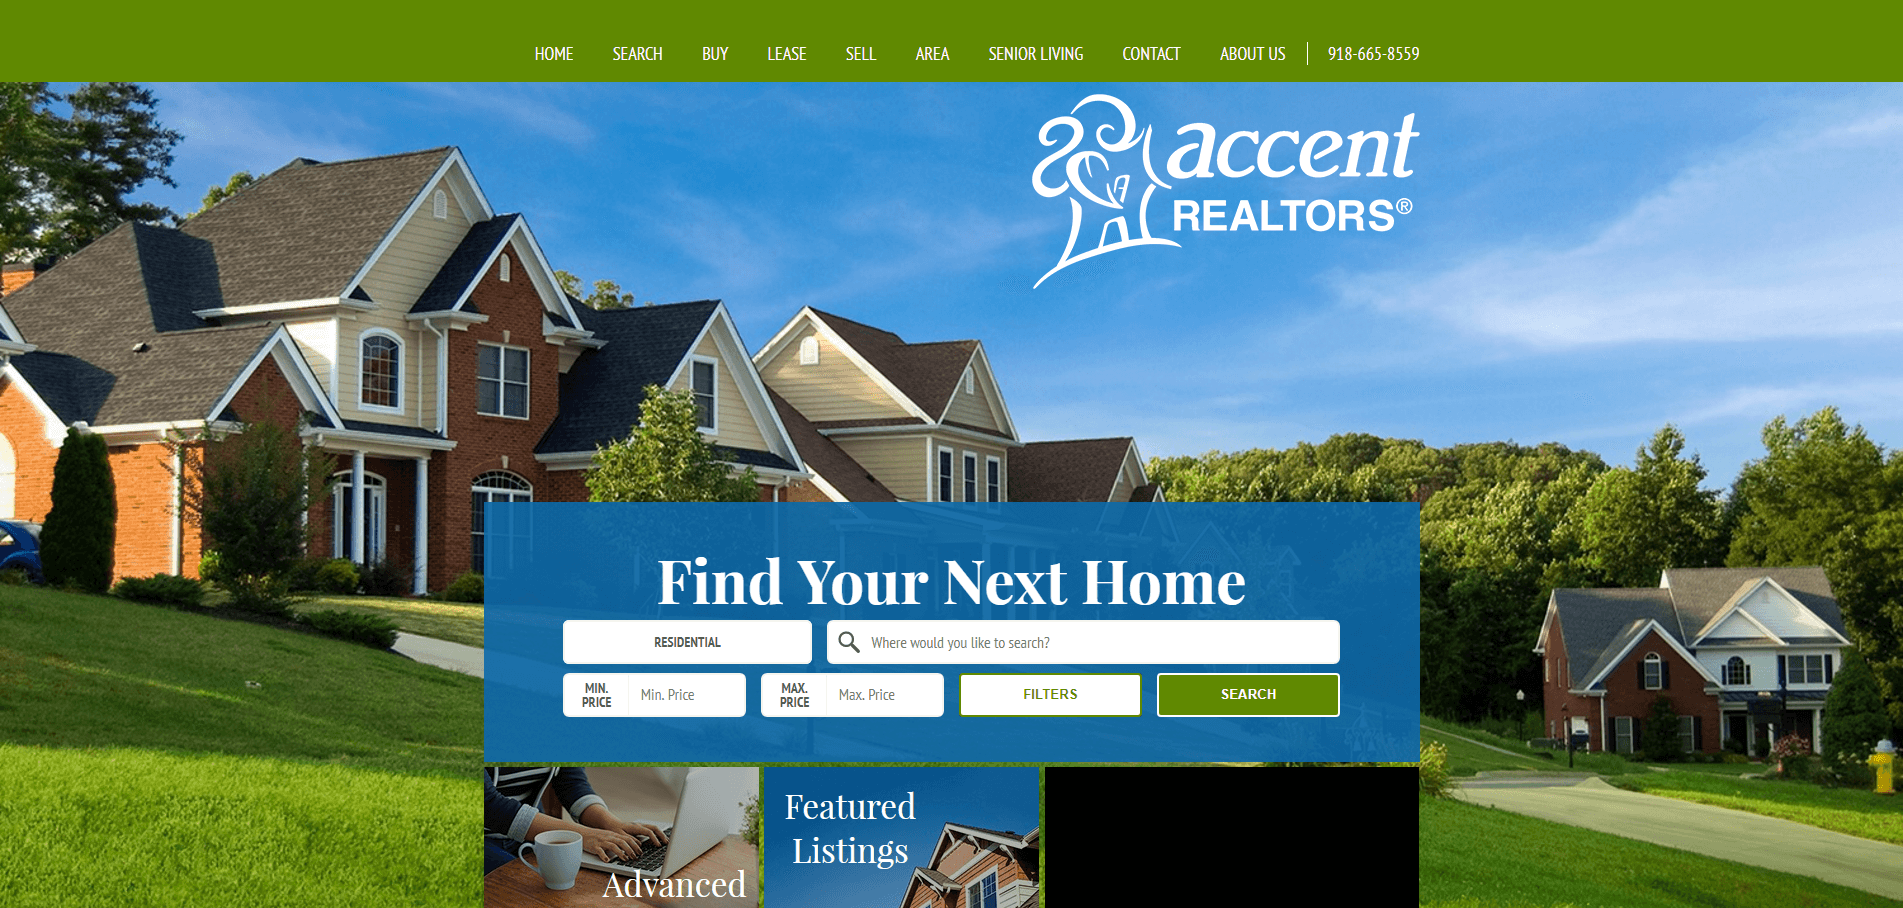  Awesome!  Looking for the best real estate websites? Here are 101 of them.  We reviewed each site and ranked them 1-101.  Here's accentrealtors.com.  Who made the list? 